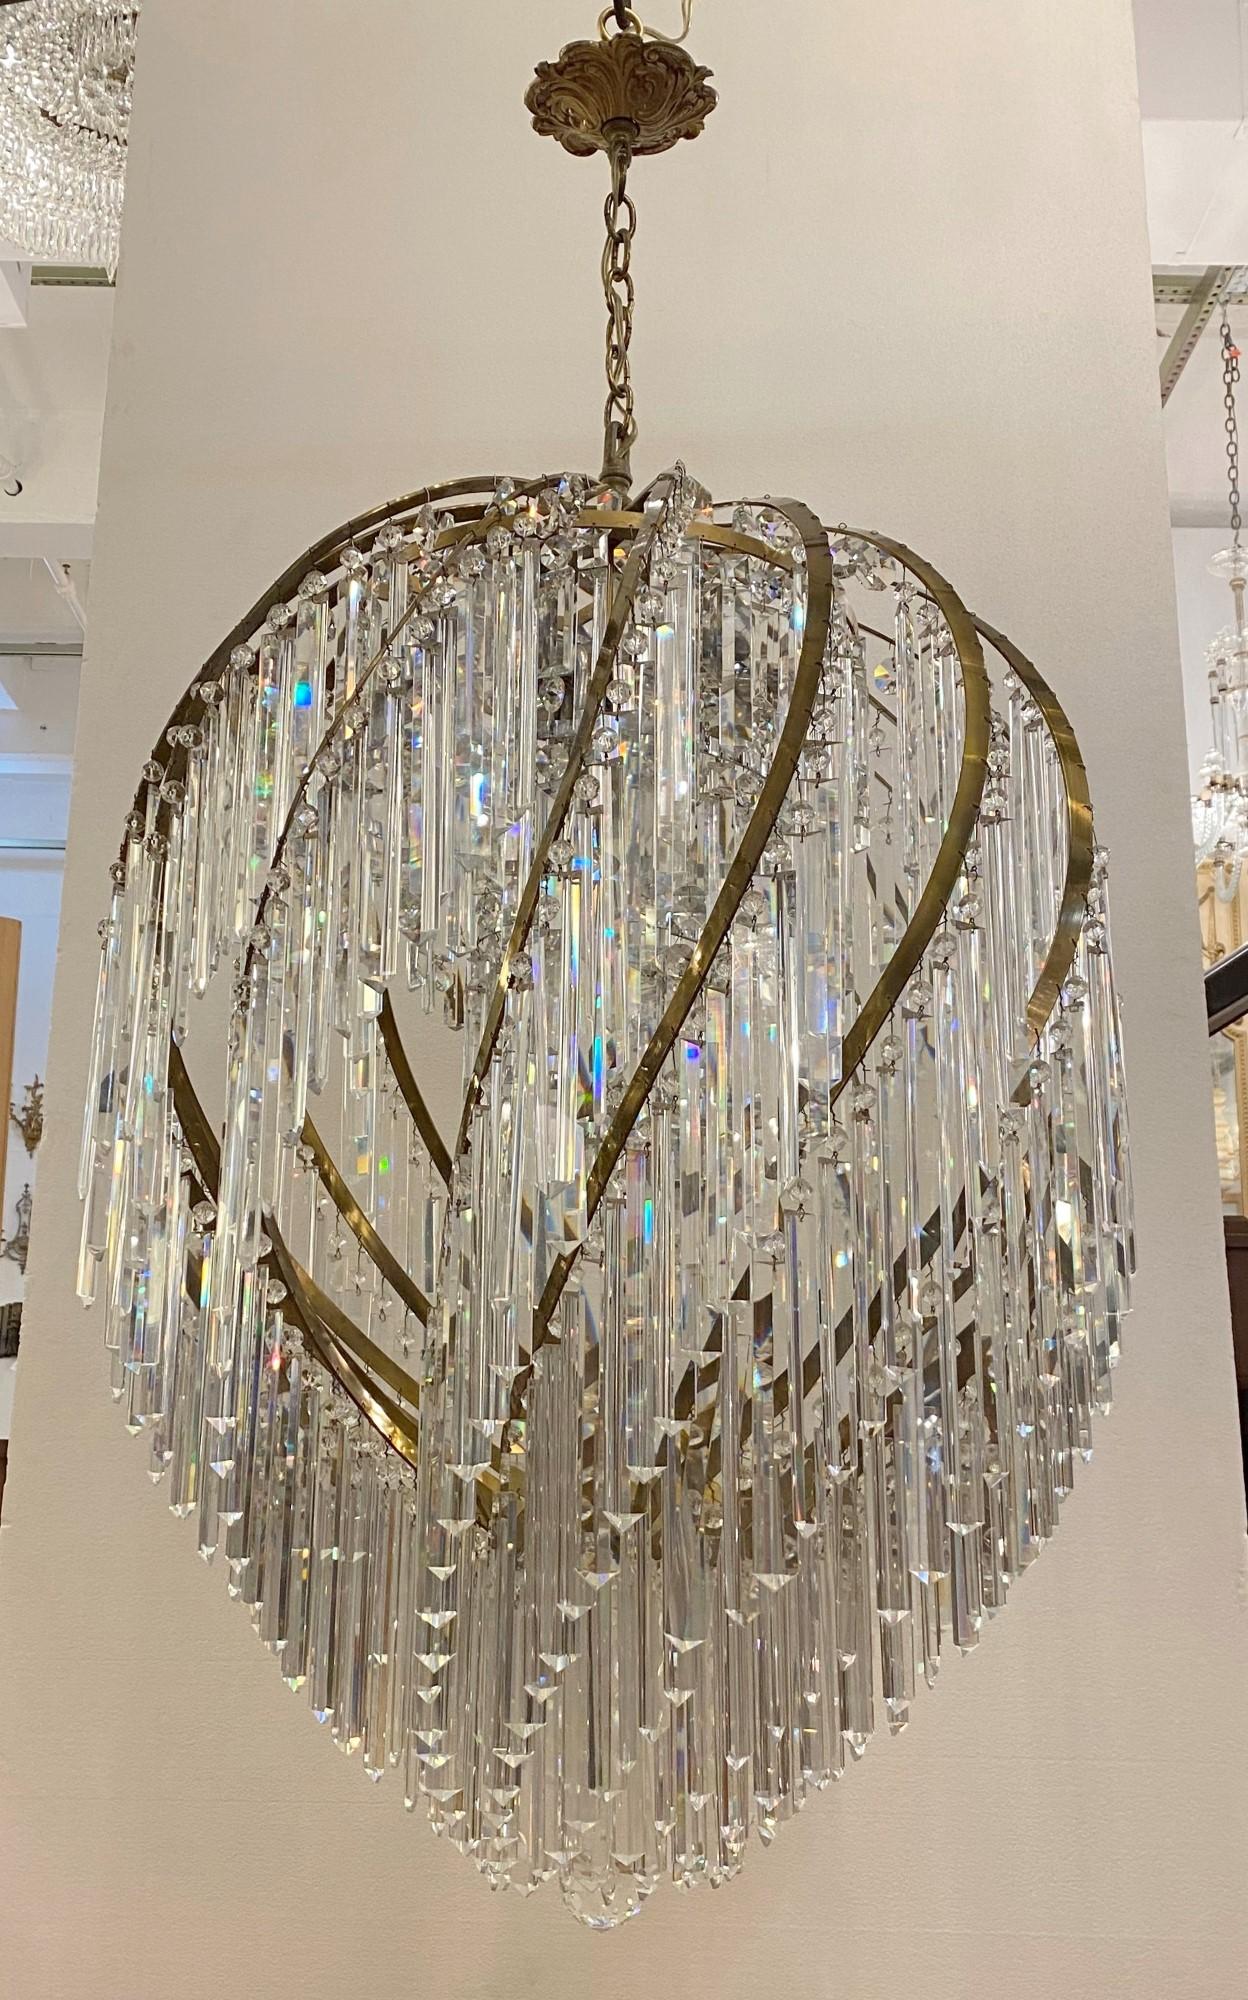 Oversized Italian made Grand Swirl style large clear crystal chandelier with a swirled brass frame. This has 17 sockets.